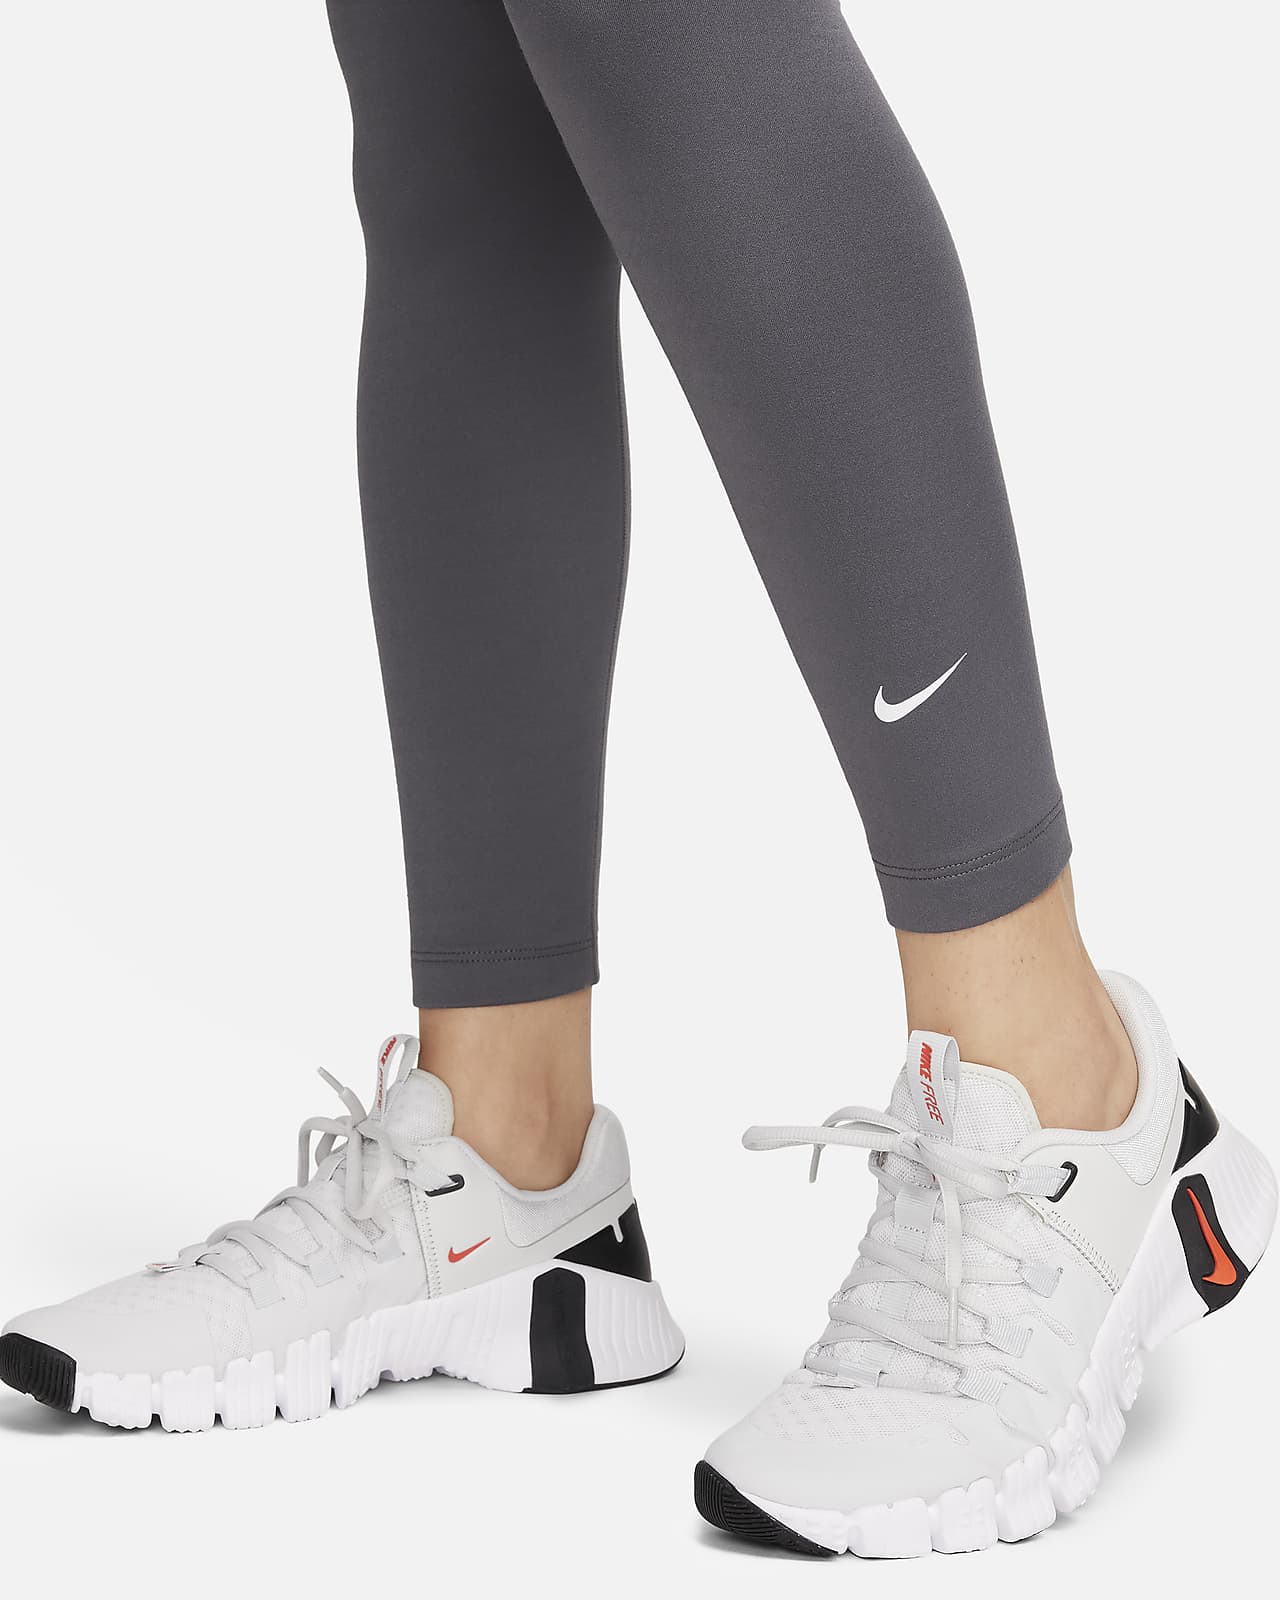 NEW Nike Therma-FIT One Mid-Rise Graphic Training Leggings DQ6186-010-  Black - S